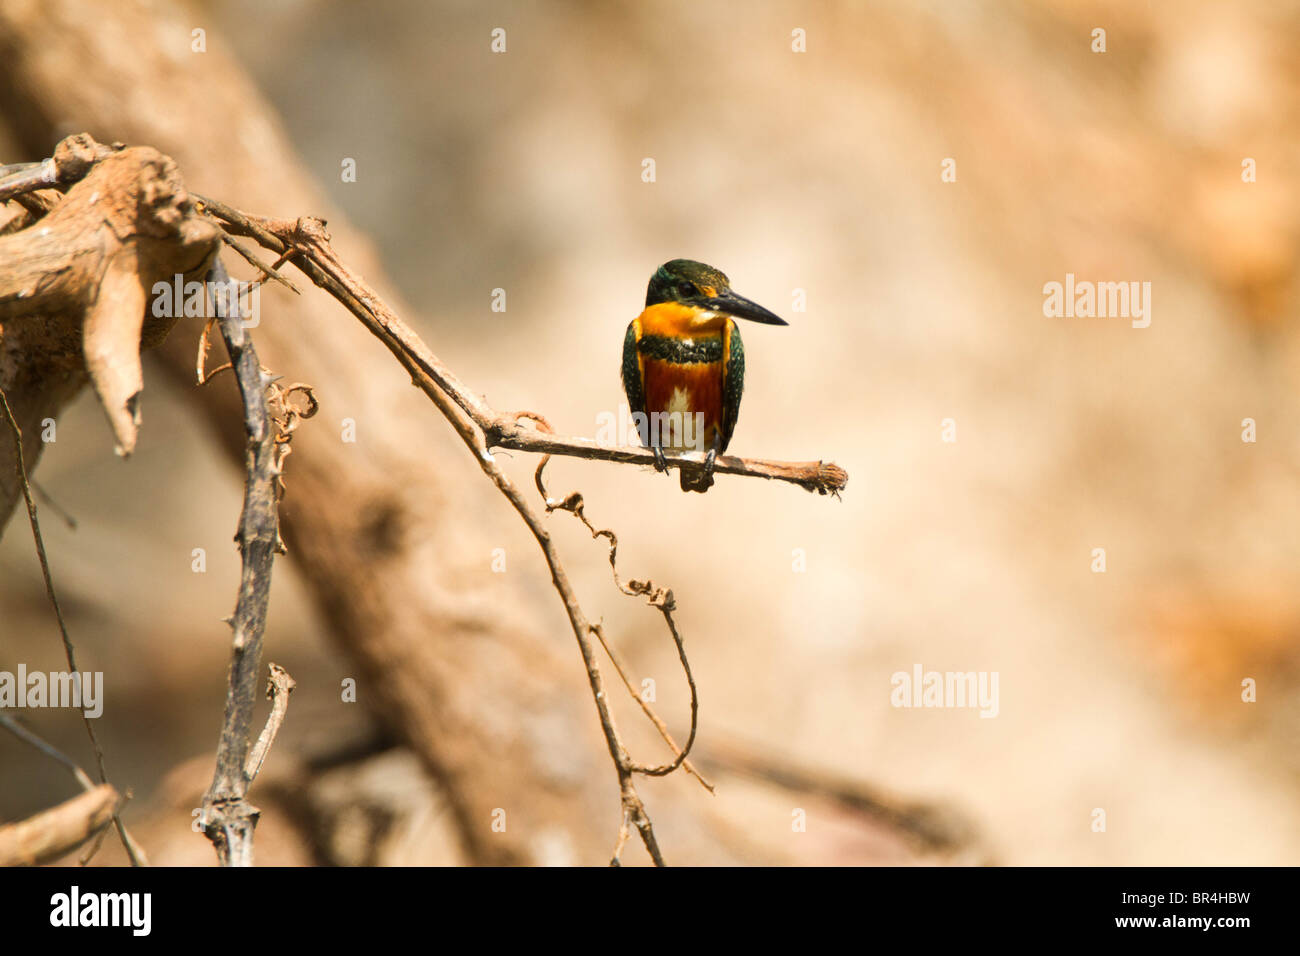 Pigmy kingfisher bird perched on a branch in the Pantanal Brazil Stock Photo